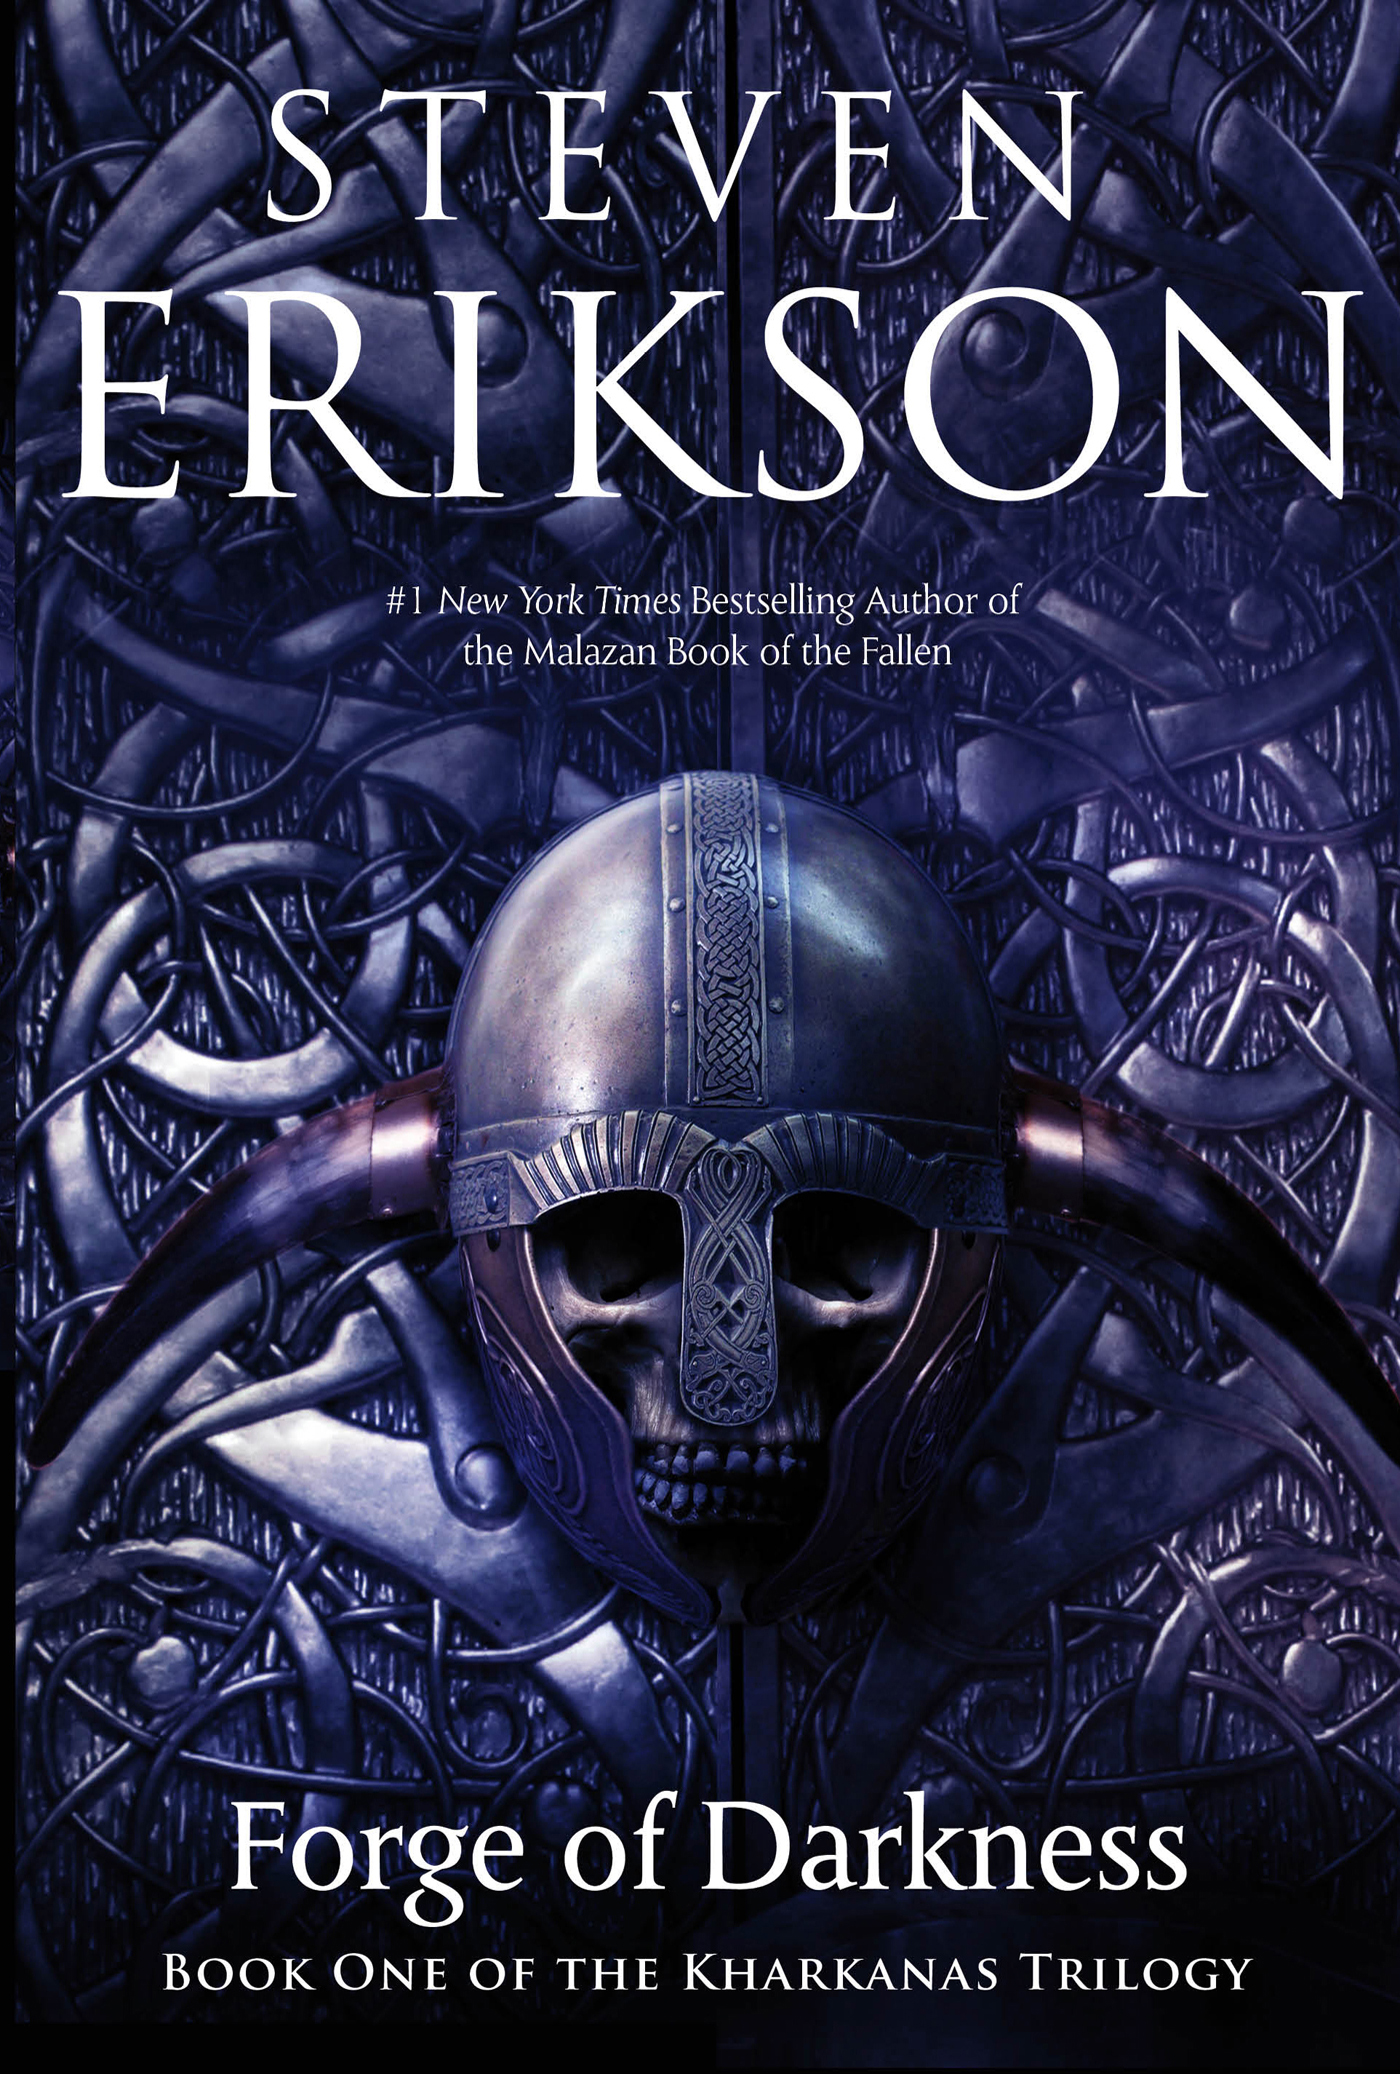 Forge of Darkness : Book One of the Kharkanas Trilogy (A Novel of the Malazan Empire) by Steven Erikson